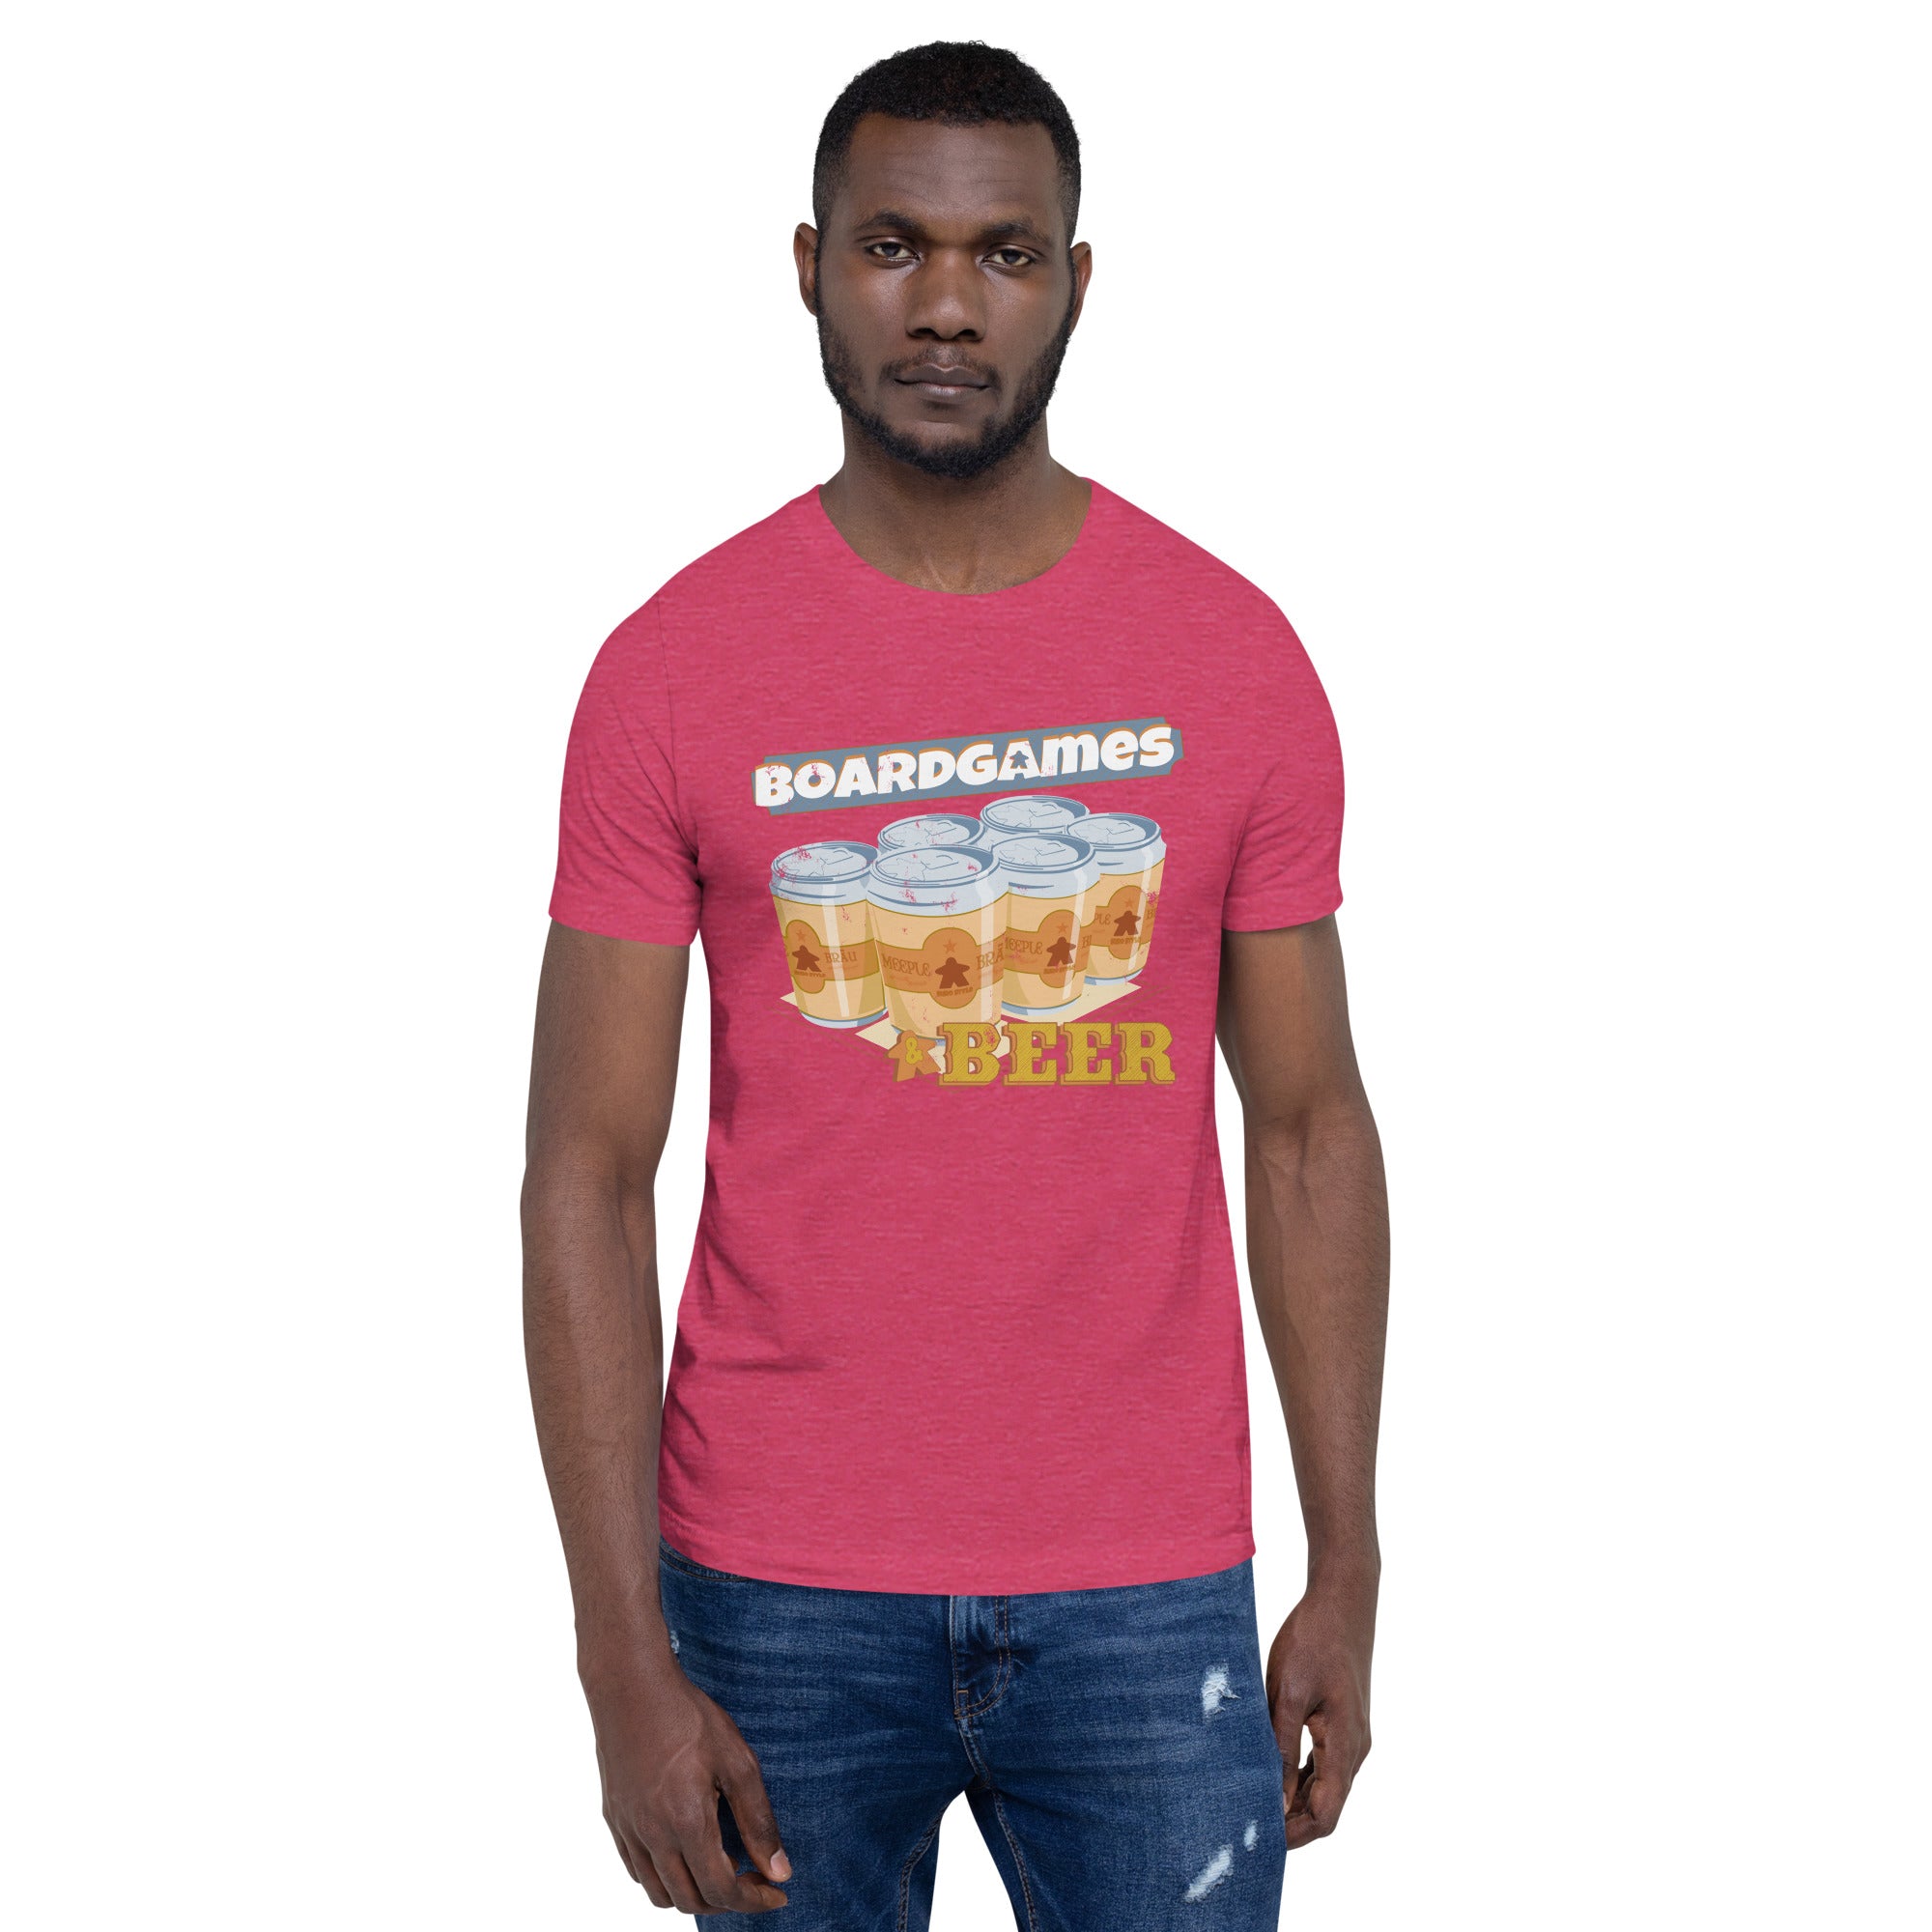 Boardgames and Beer T-Shirt - Meeple Shirts